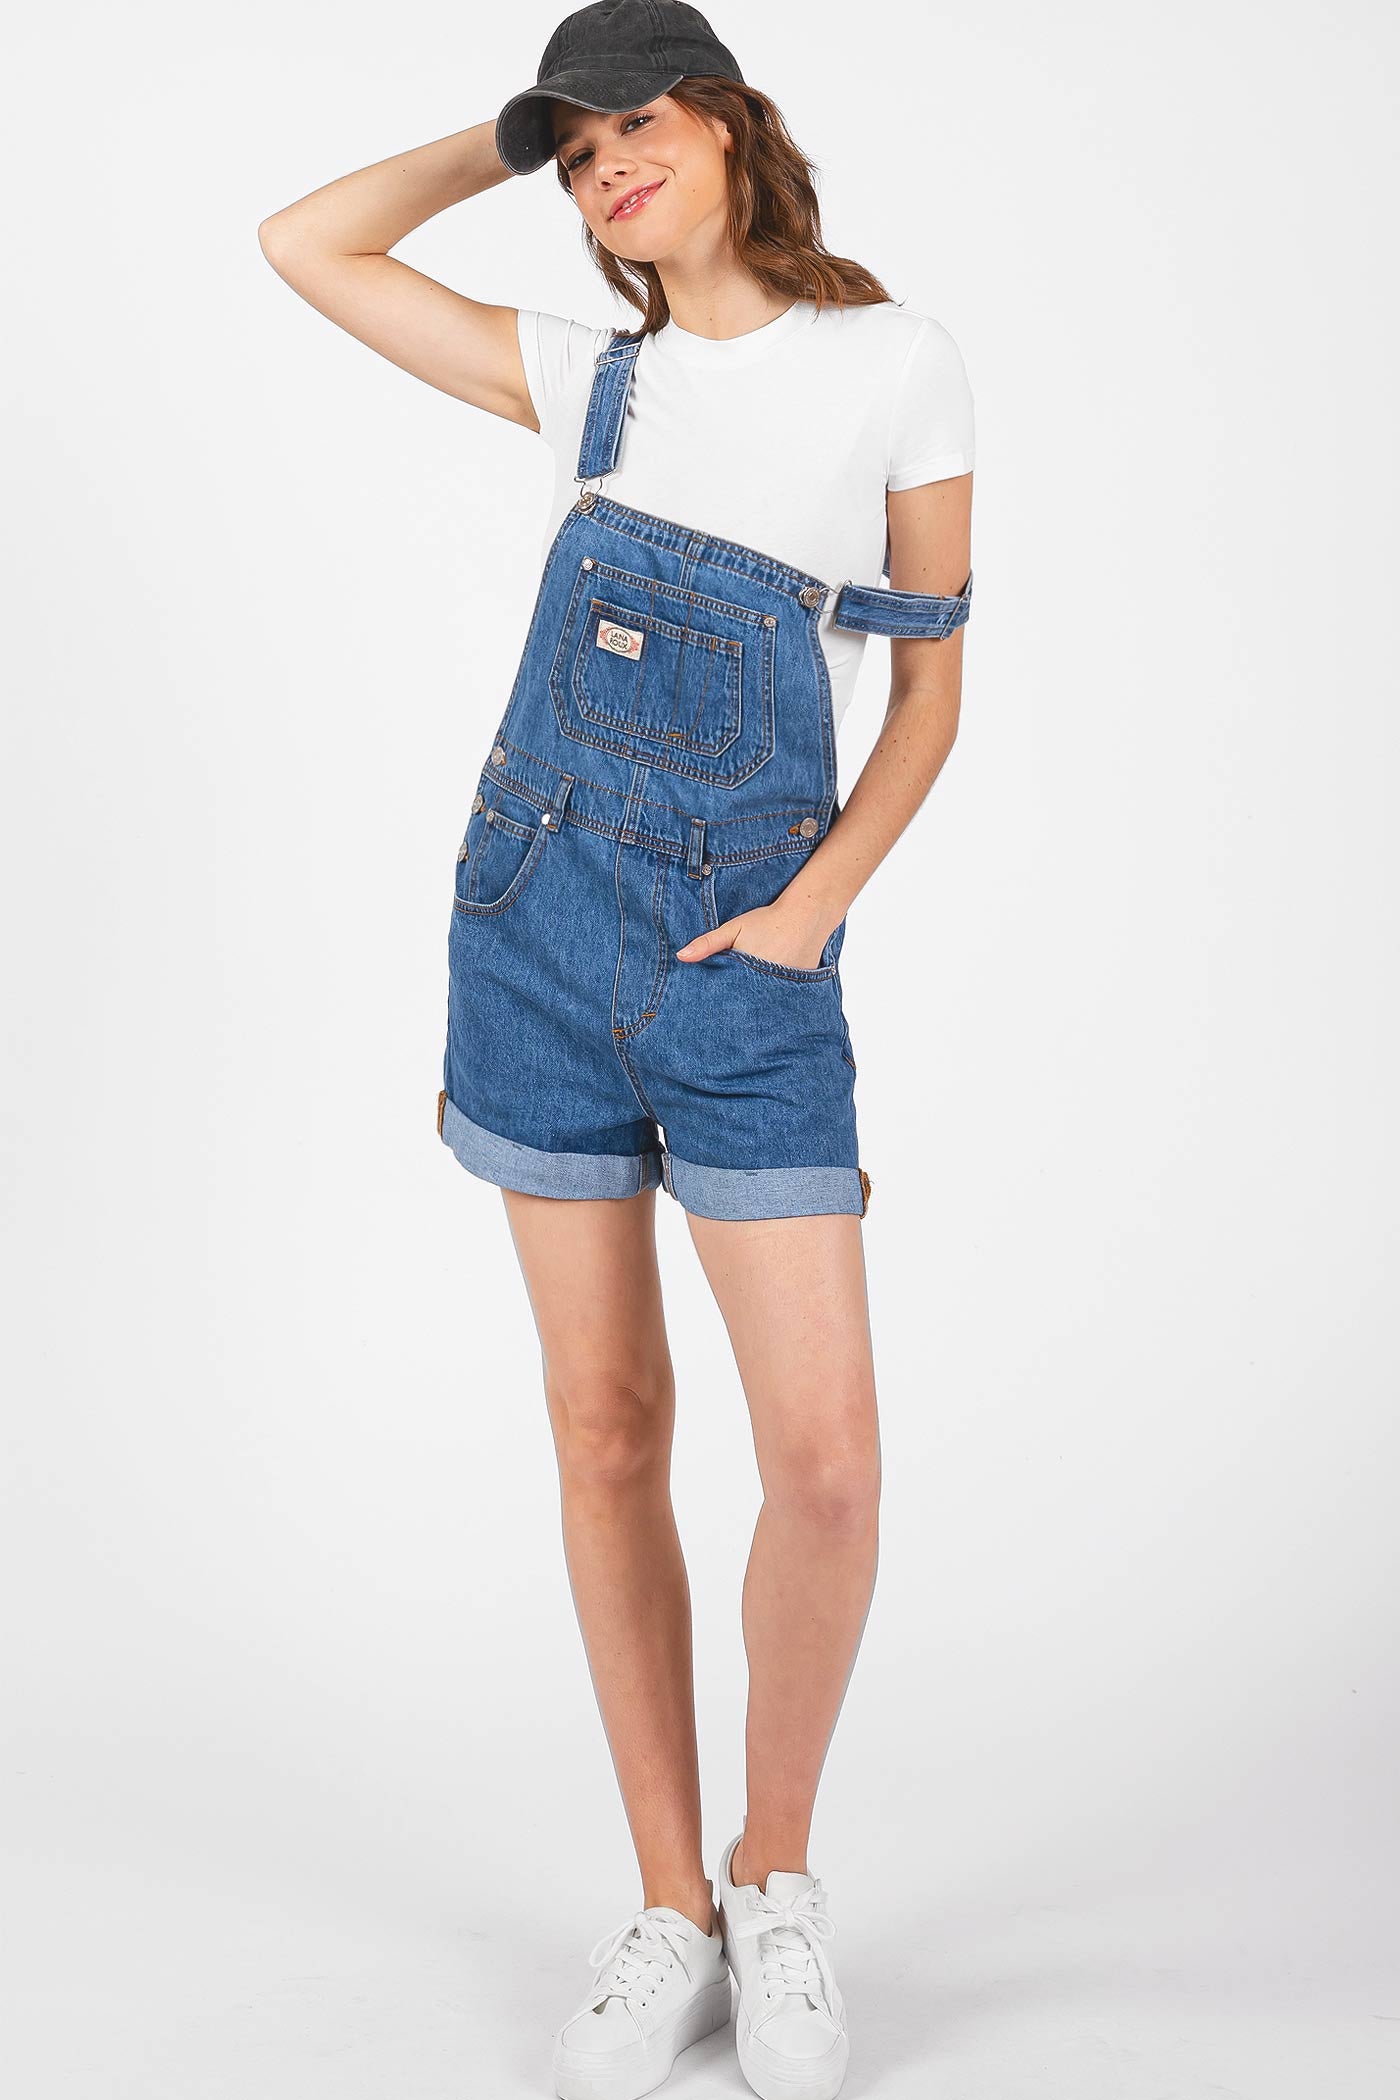 Lana Roux Womens Relaxed Fit Oversized Boyfriend Jean Short Overalls